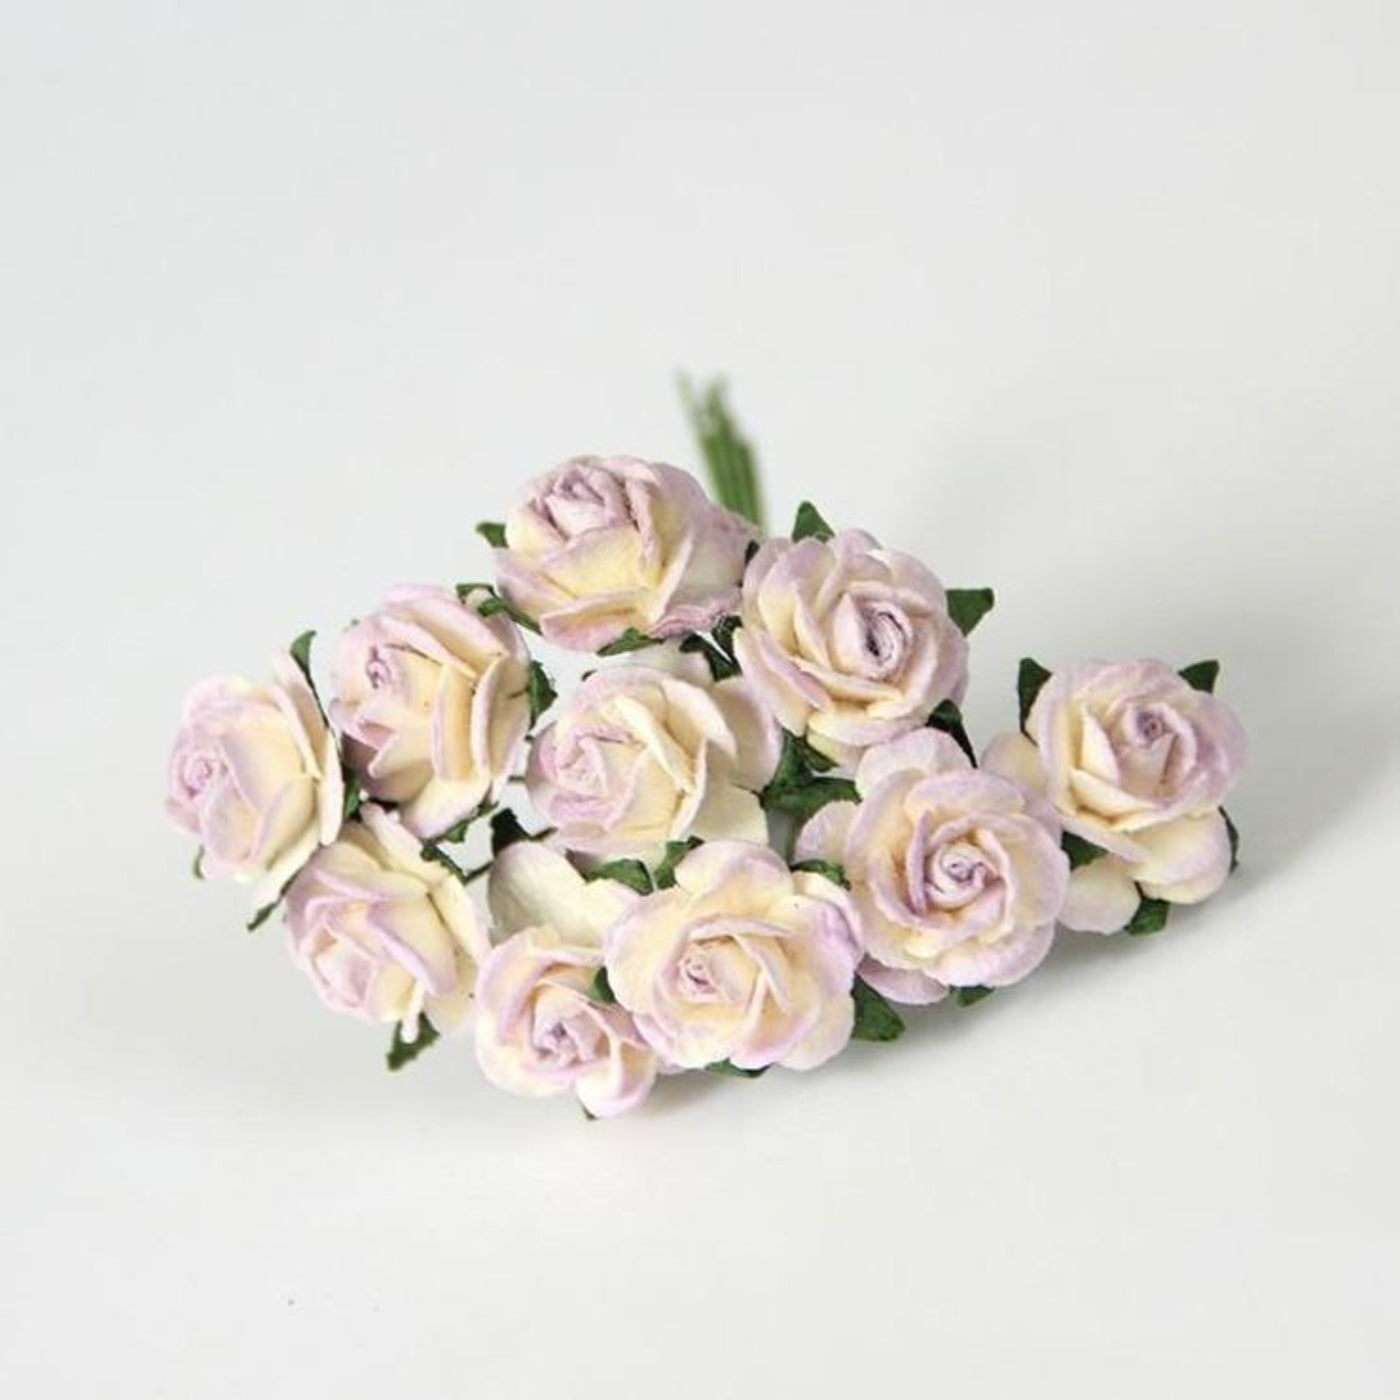 10 Pcs - Mulberry Paper Flowers - 1.5cm Rounded Petal Roses - Cream and Soft Lilac